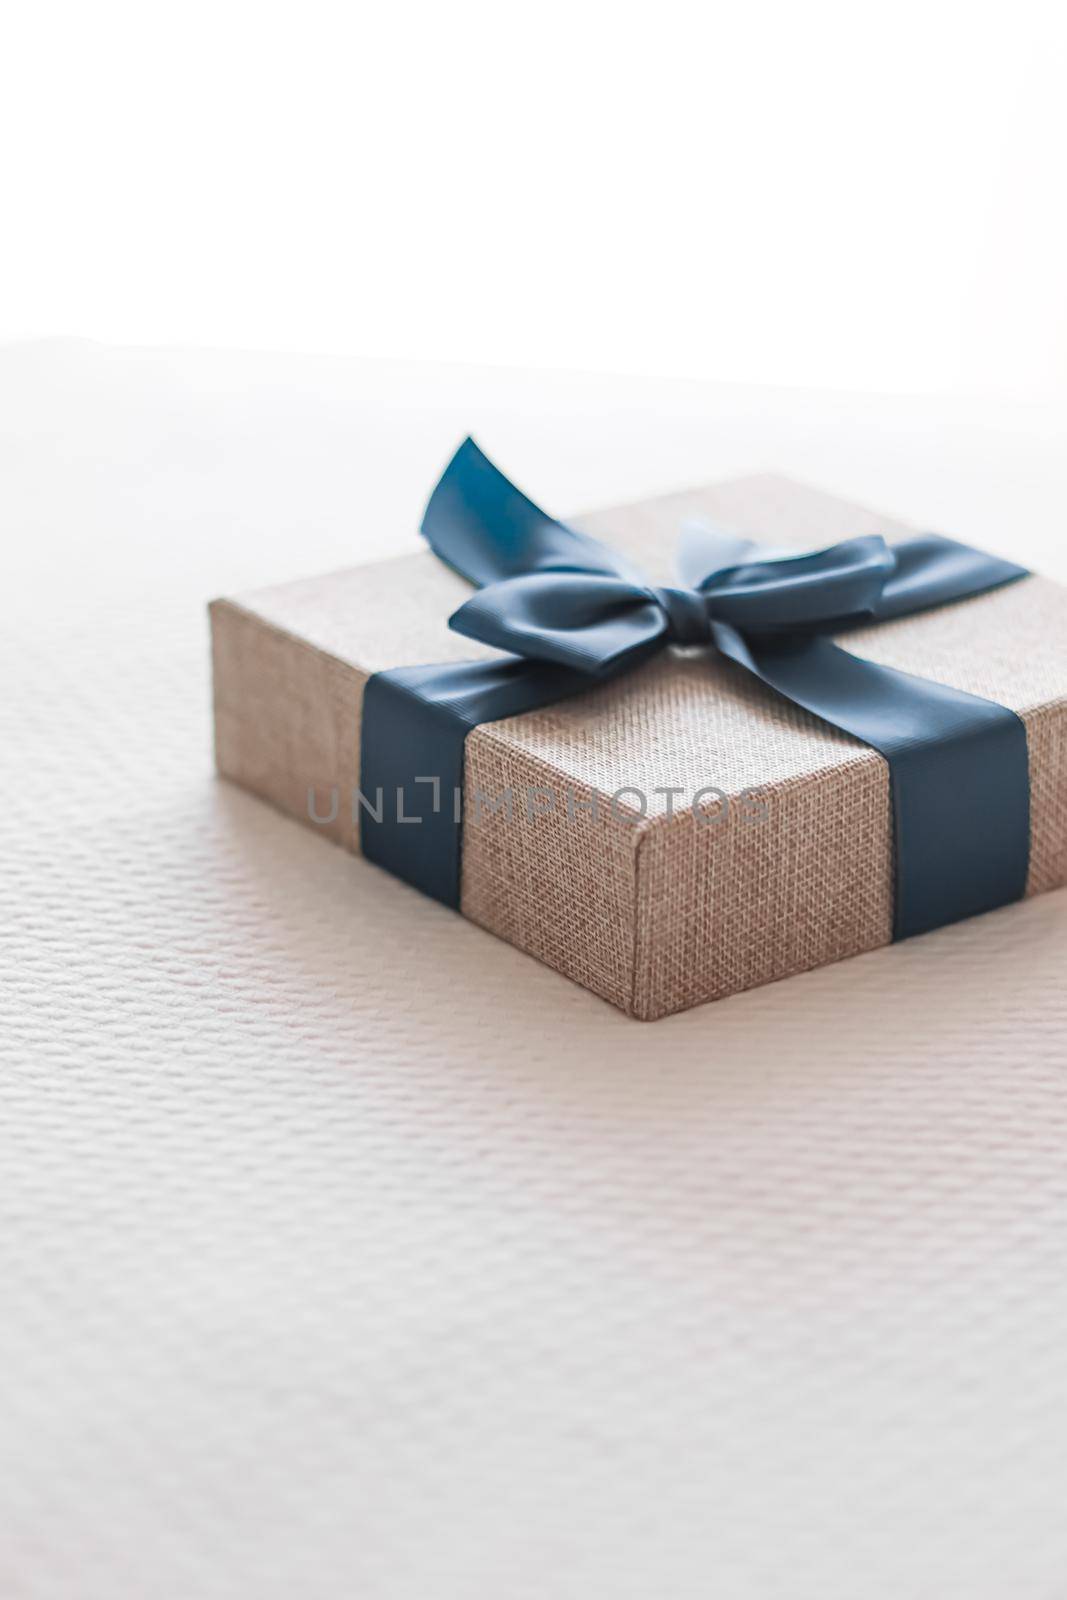 Holiday present and luxury online shopping delivery, wrapped linen gift box with blue ribbon on bed in bedroom, chic countryside style by Anneleven